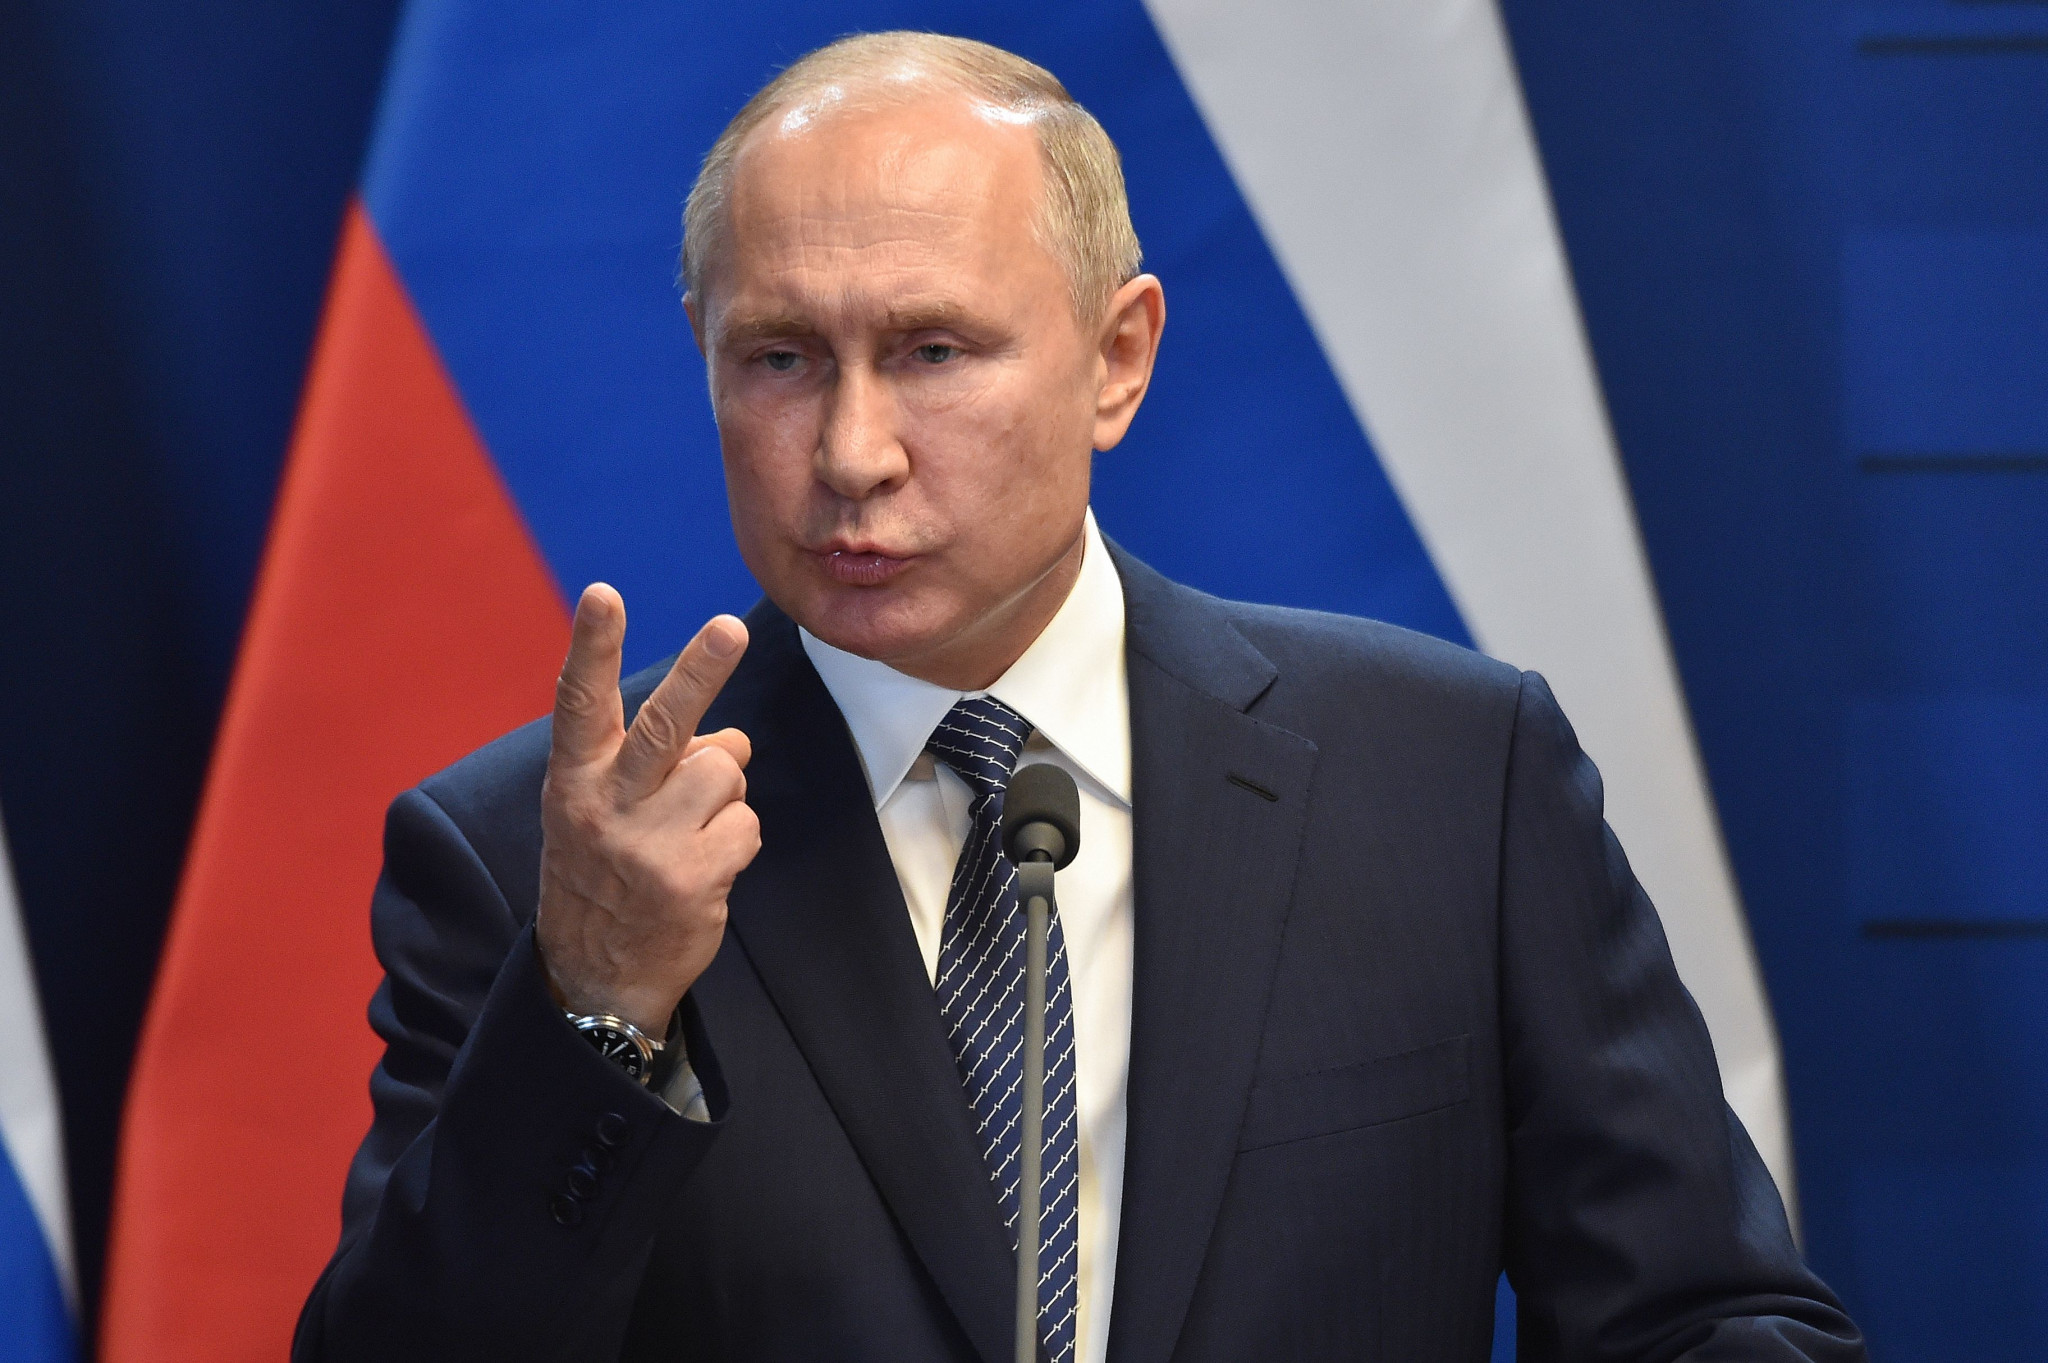 Putin announces that Russia has "all the reasons" to appeal to CAS over WADA ban